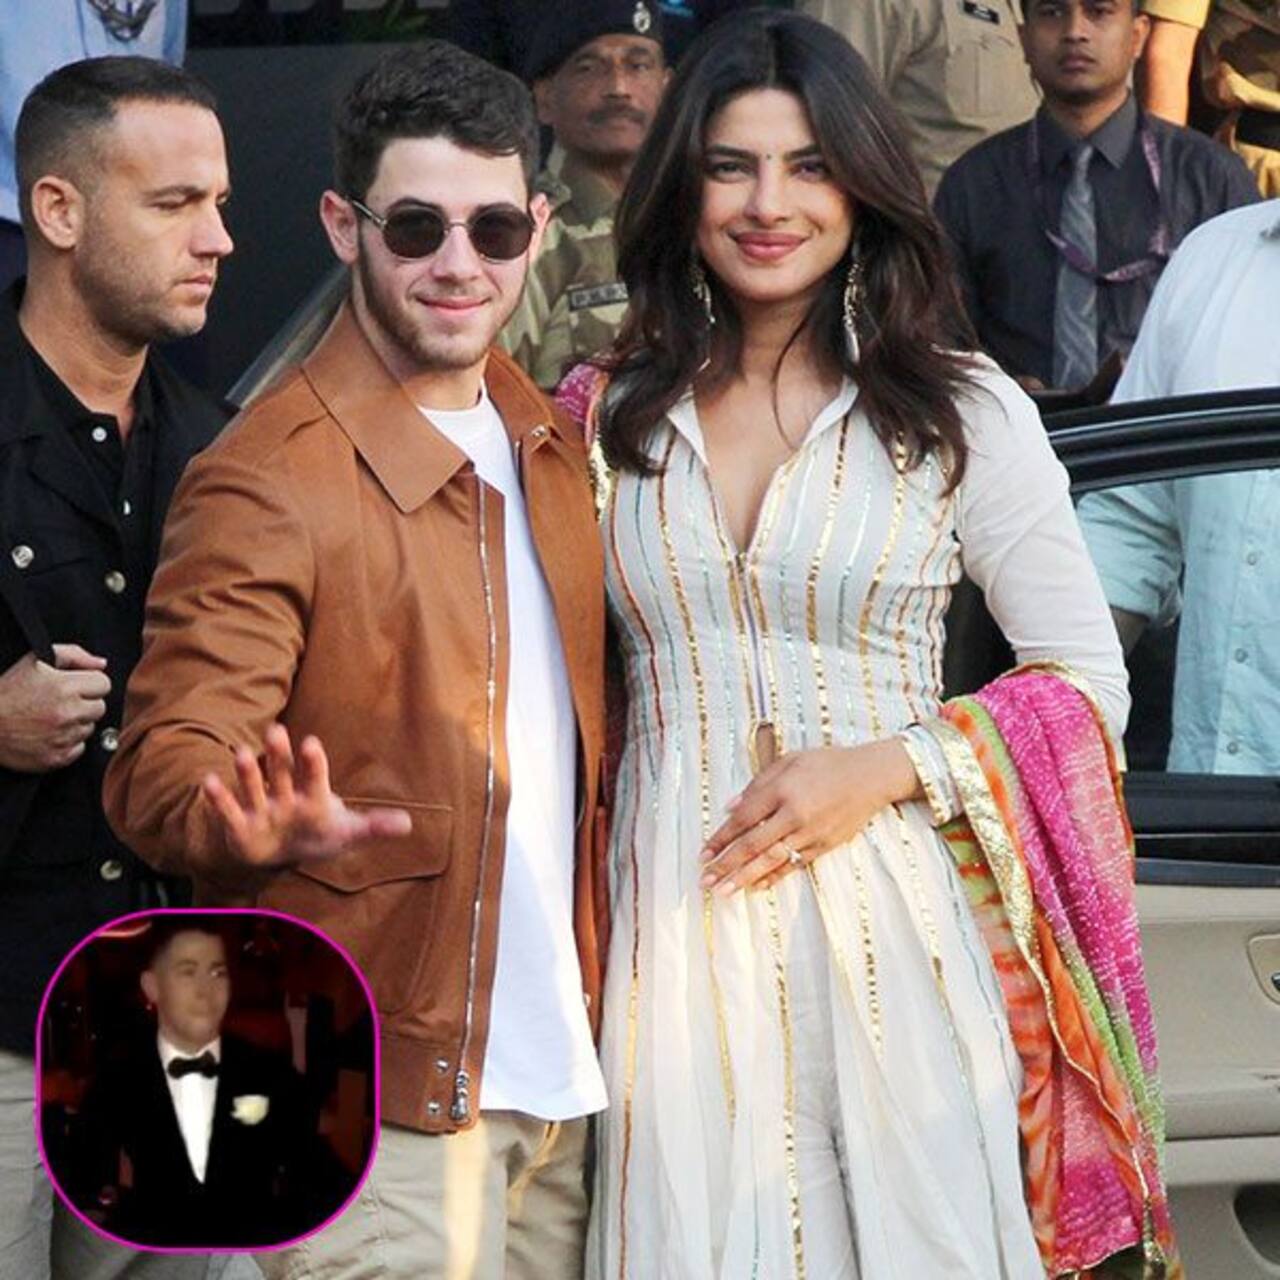 [VIDEO] This is the Oscar party where Nick Jonas went down on his knees in front of Priyanka Chopra for the FIRST TIME